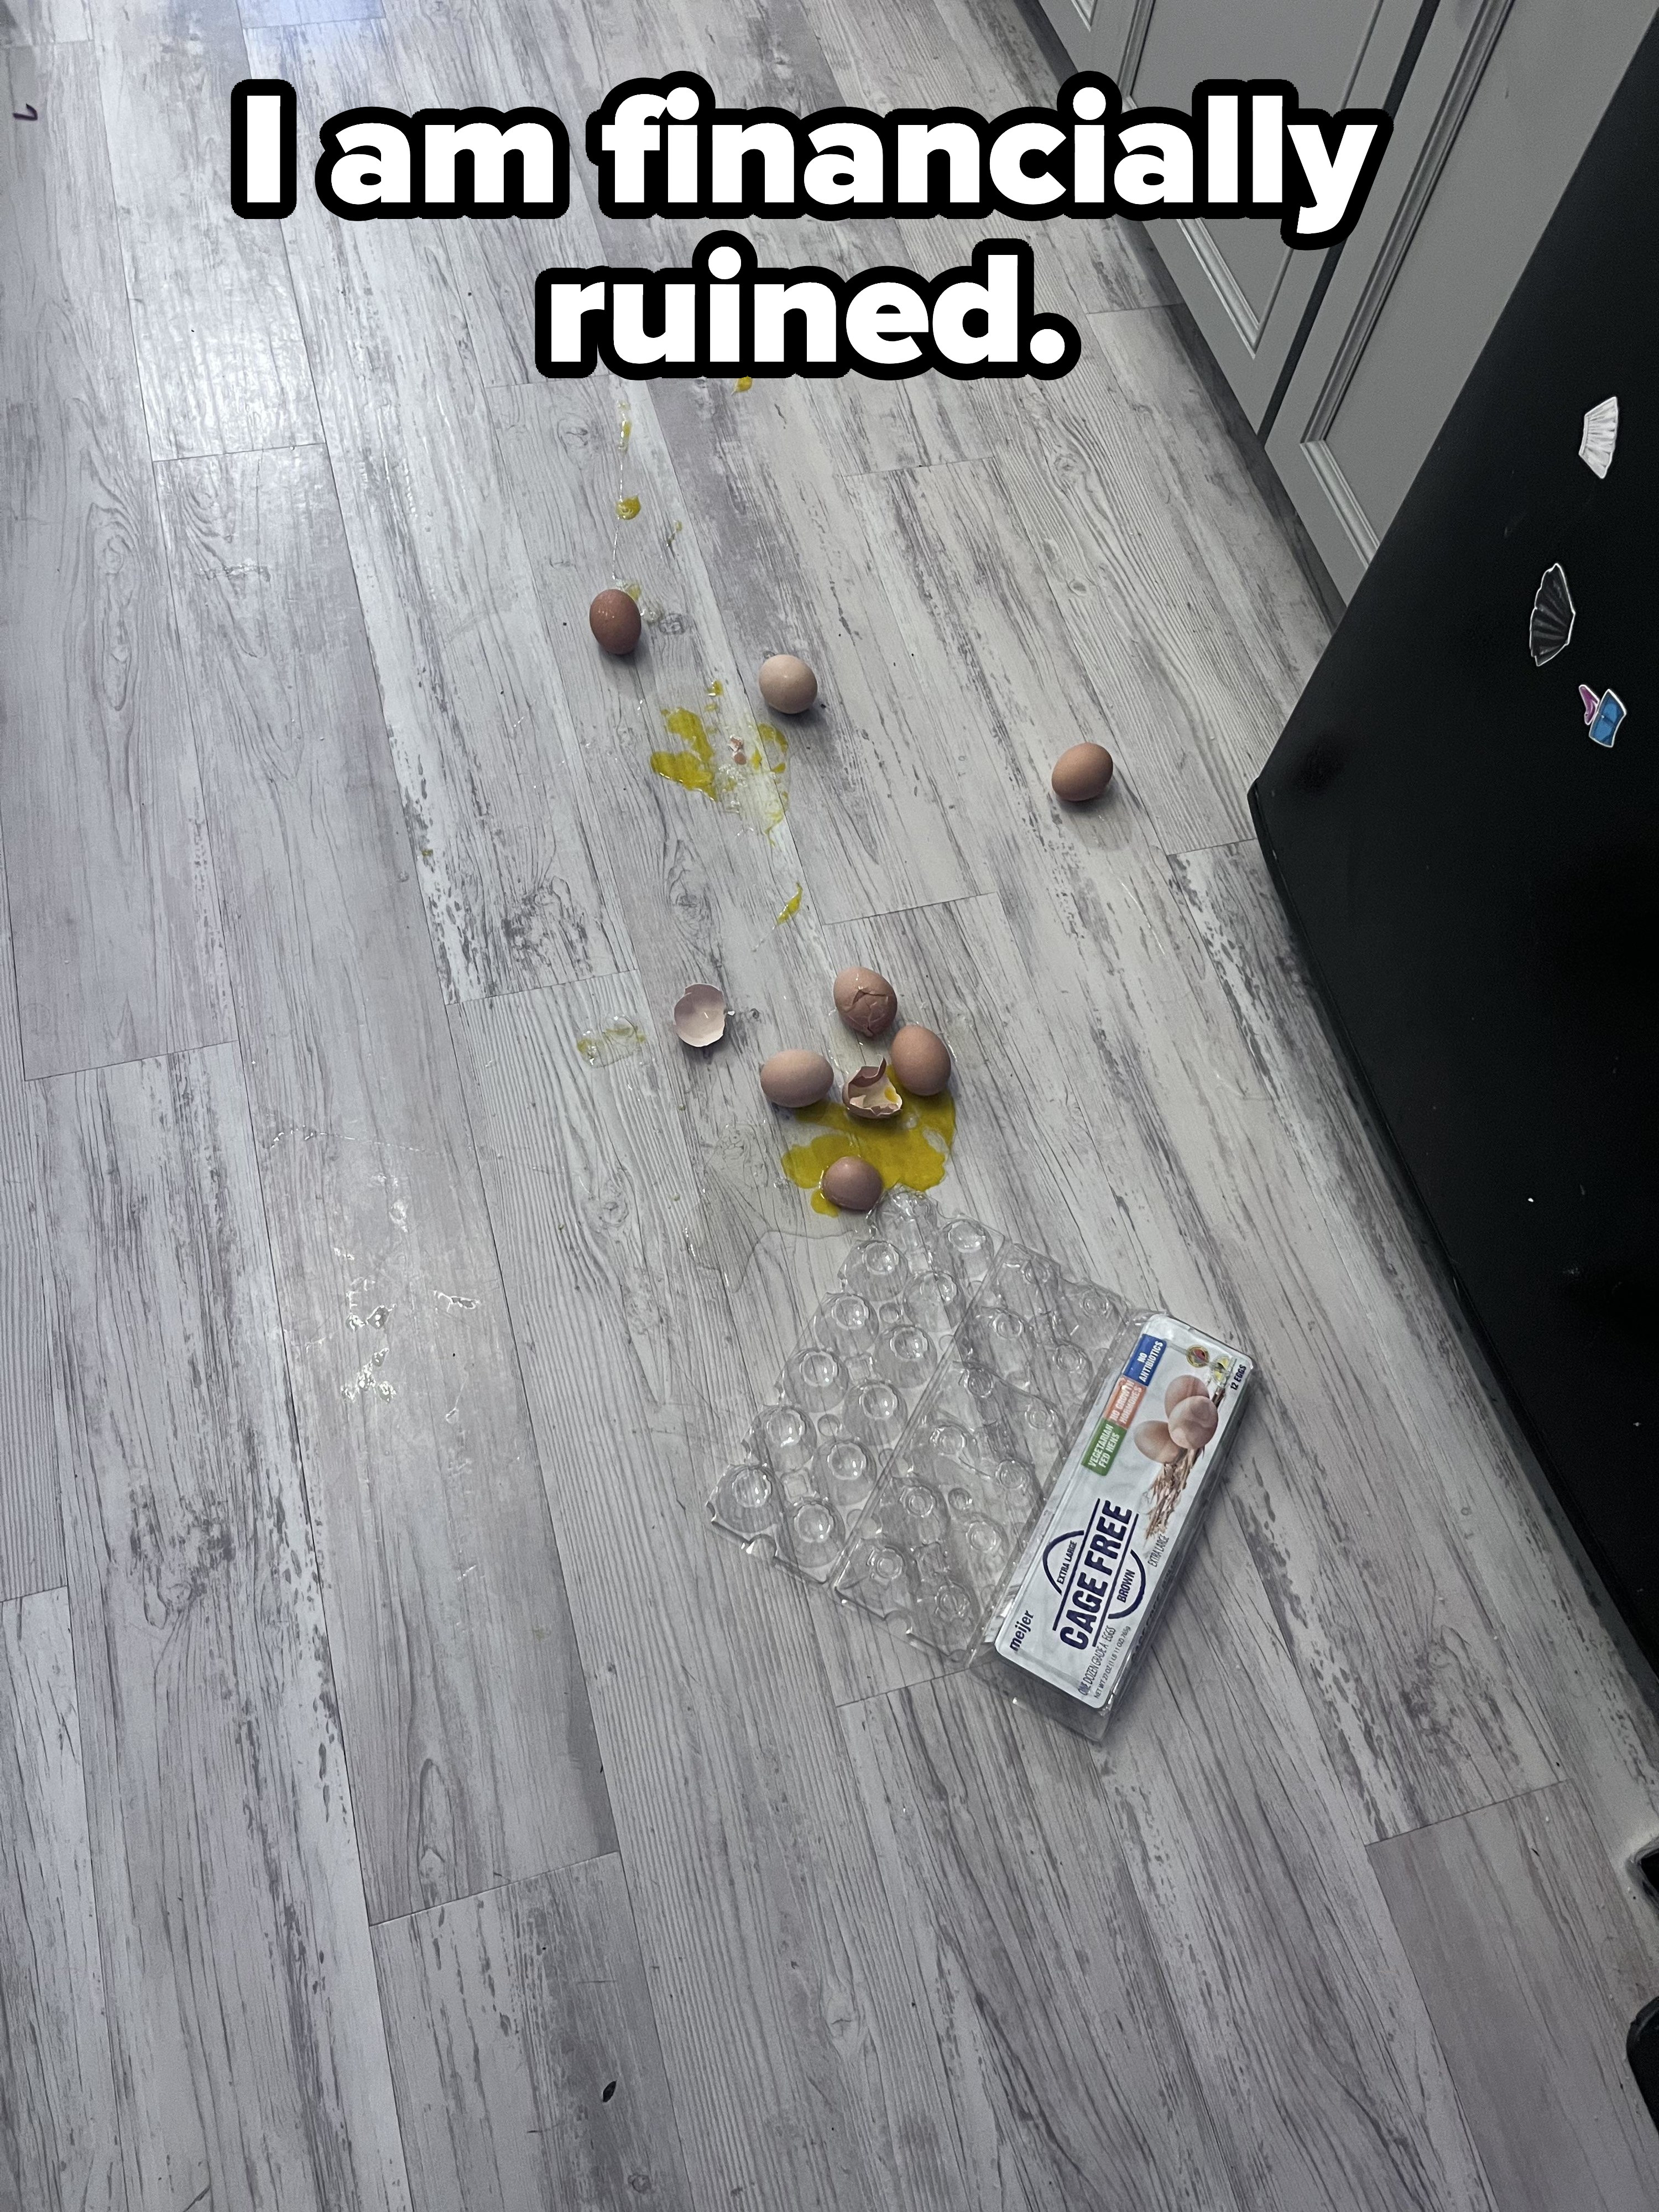 A carton of broken eggs dropped on the ground